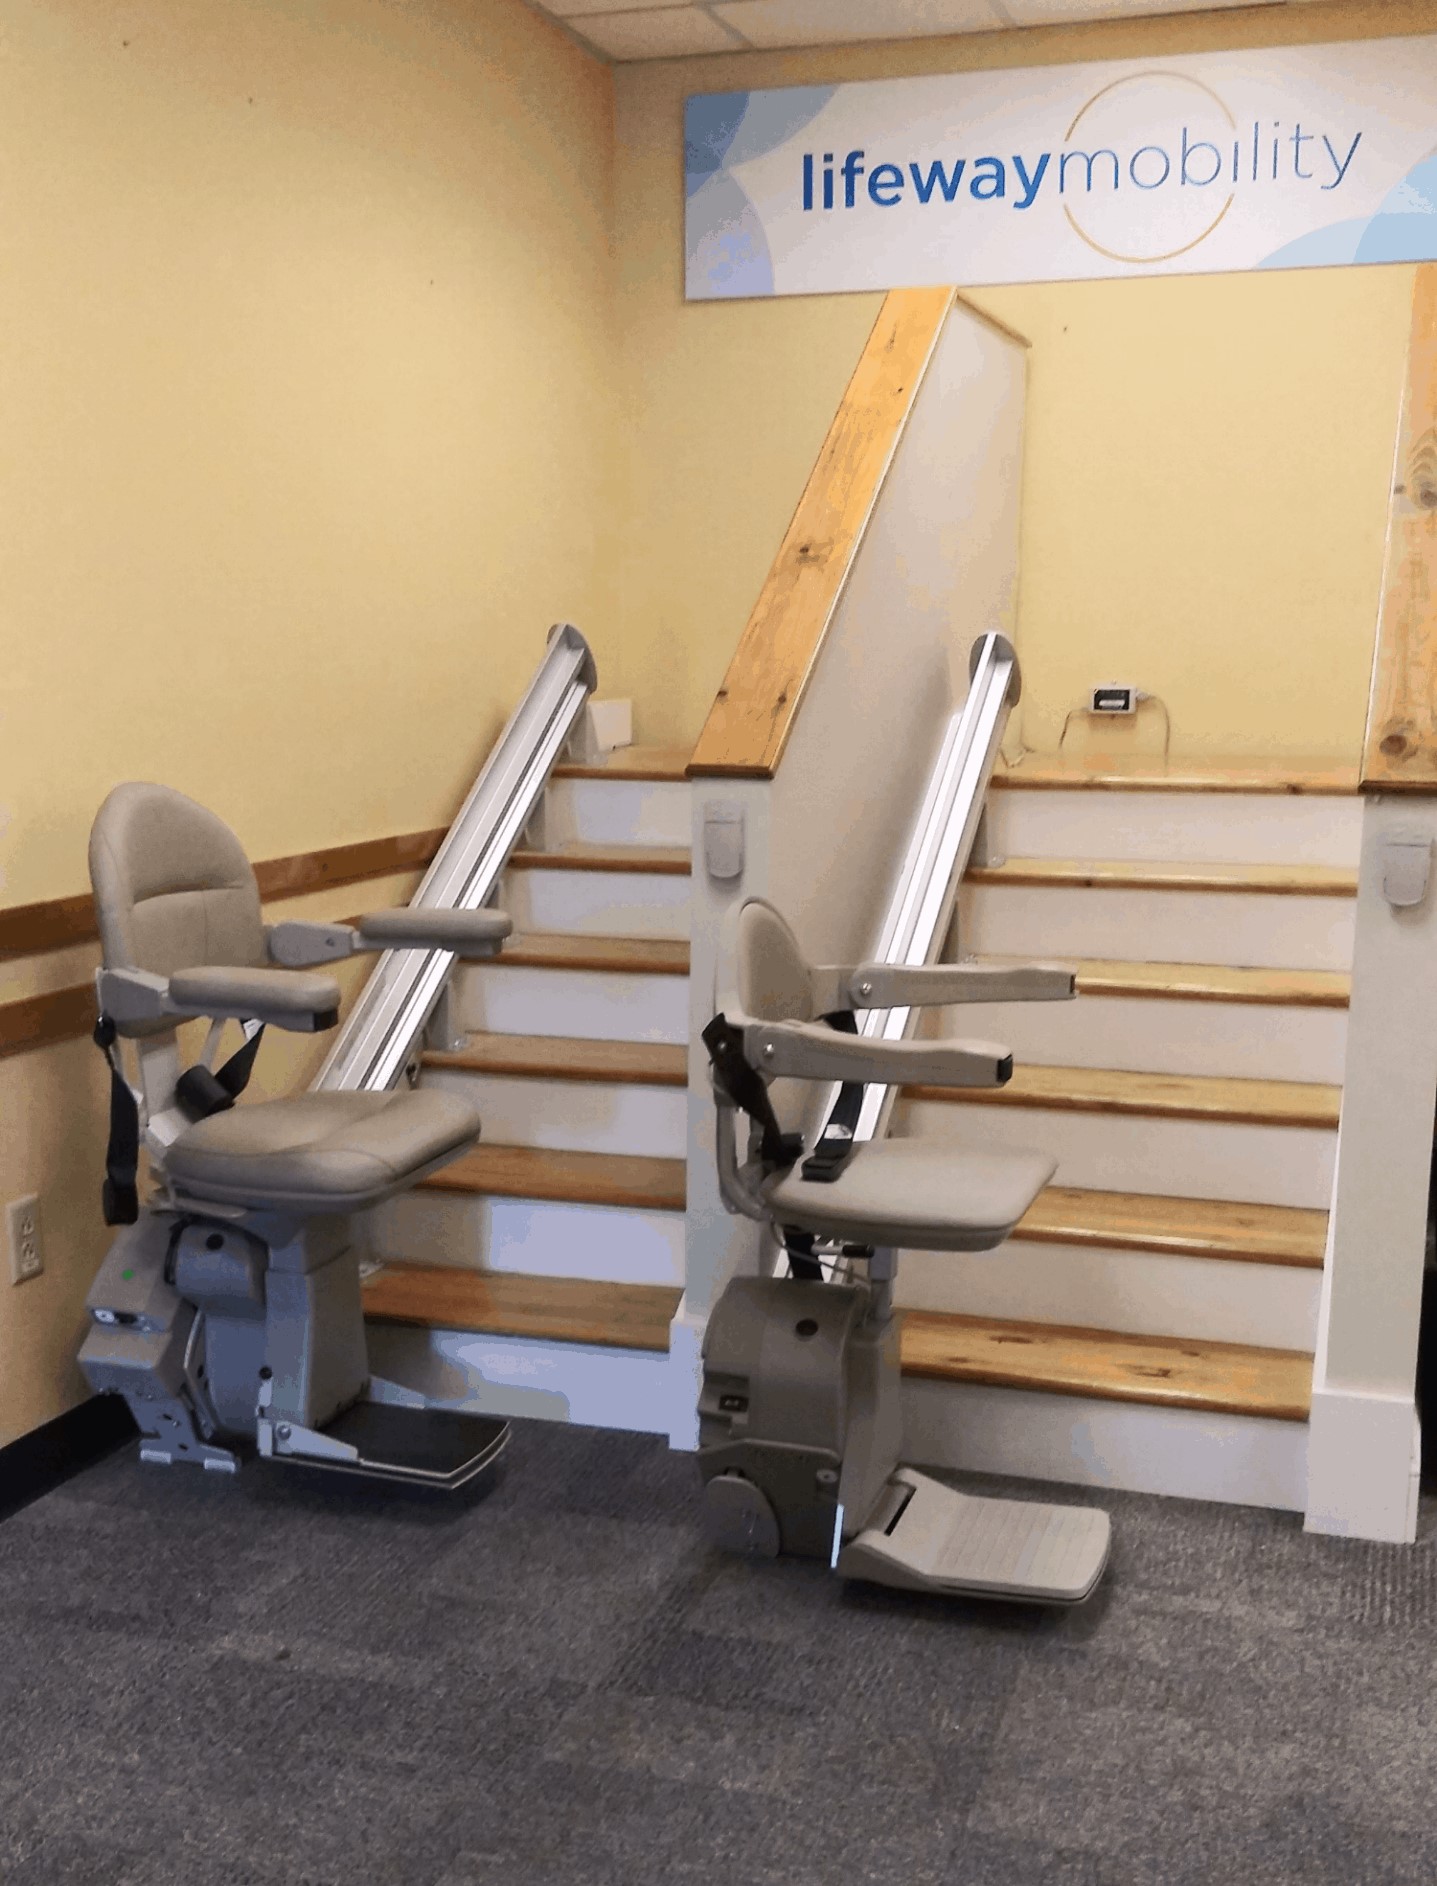 Lifeway Mobility stair lifts in Boston area showroom